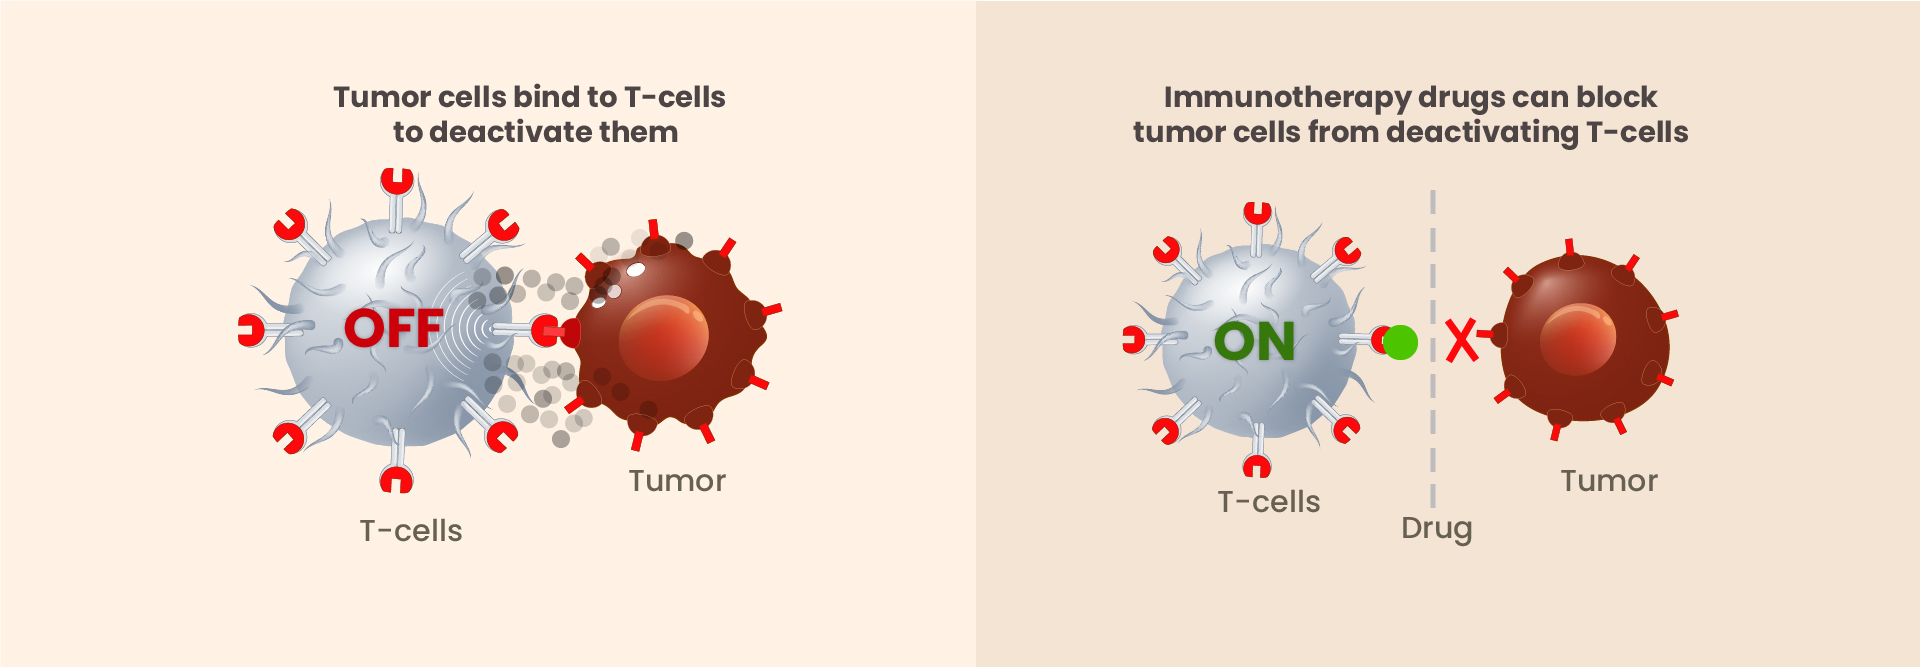 Immunotherapy drugs block tumour cells from deactivating T-cells